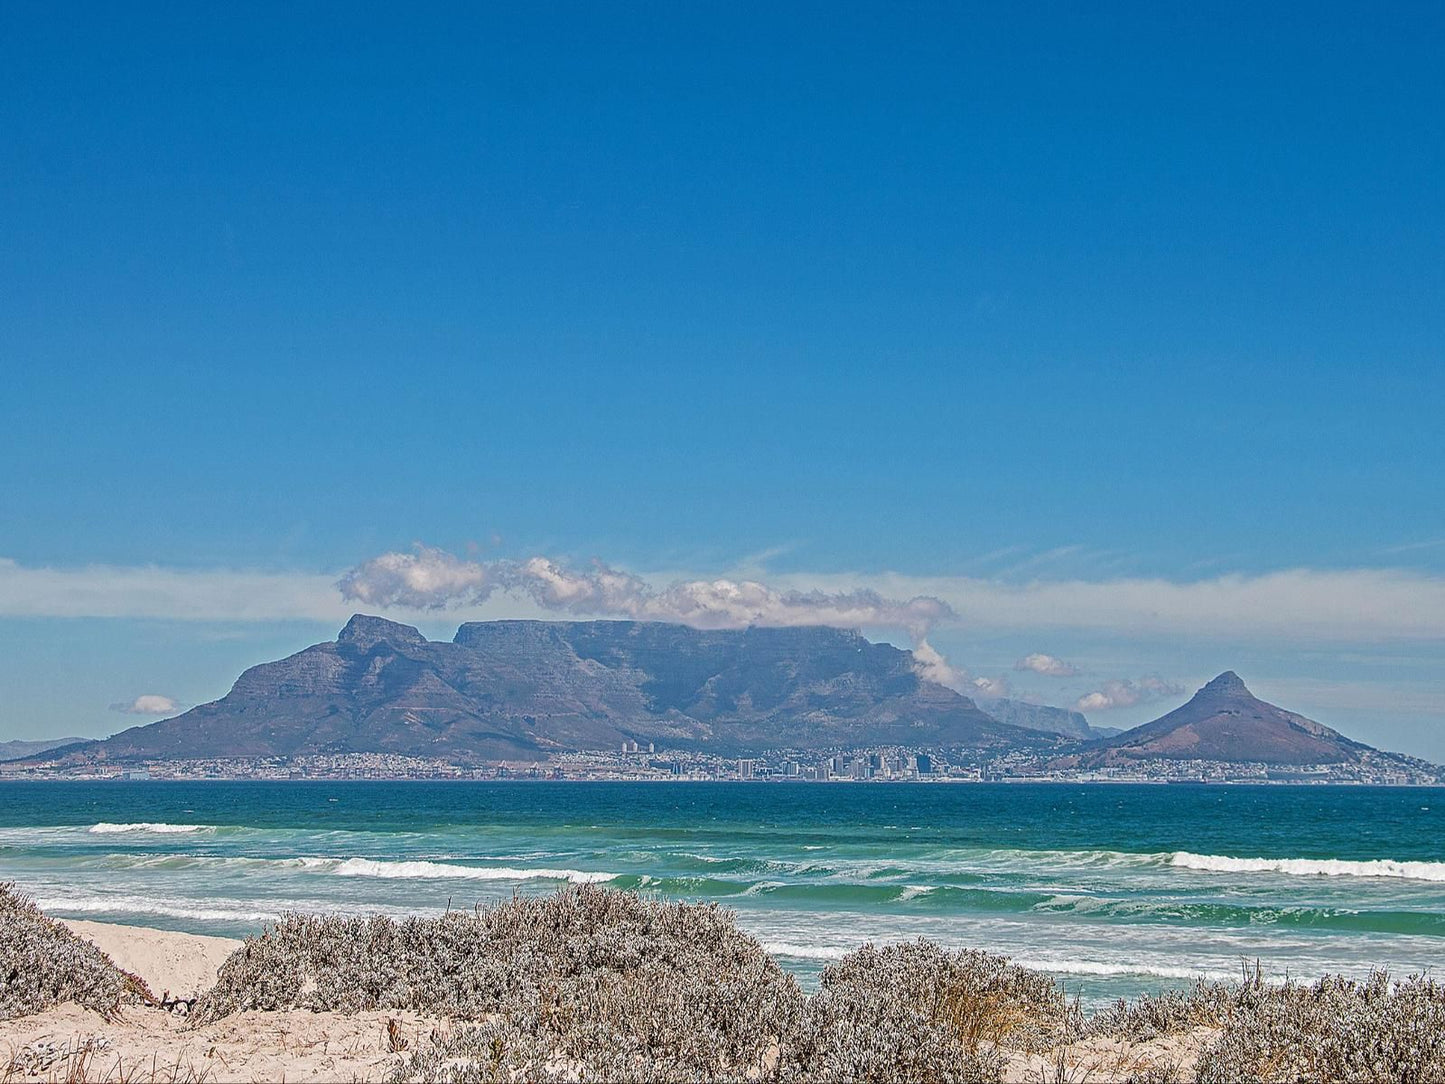 Ocean View C702 By Hostagents Bloubergrant Blouberg Western Cape South Africa Beach, Nature, Sand